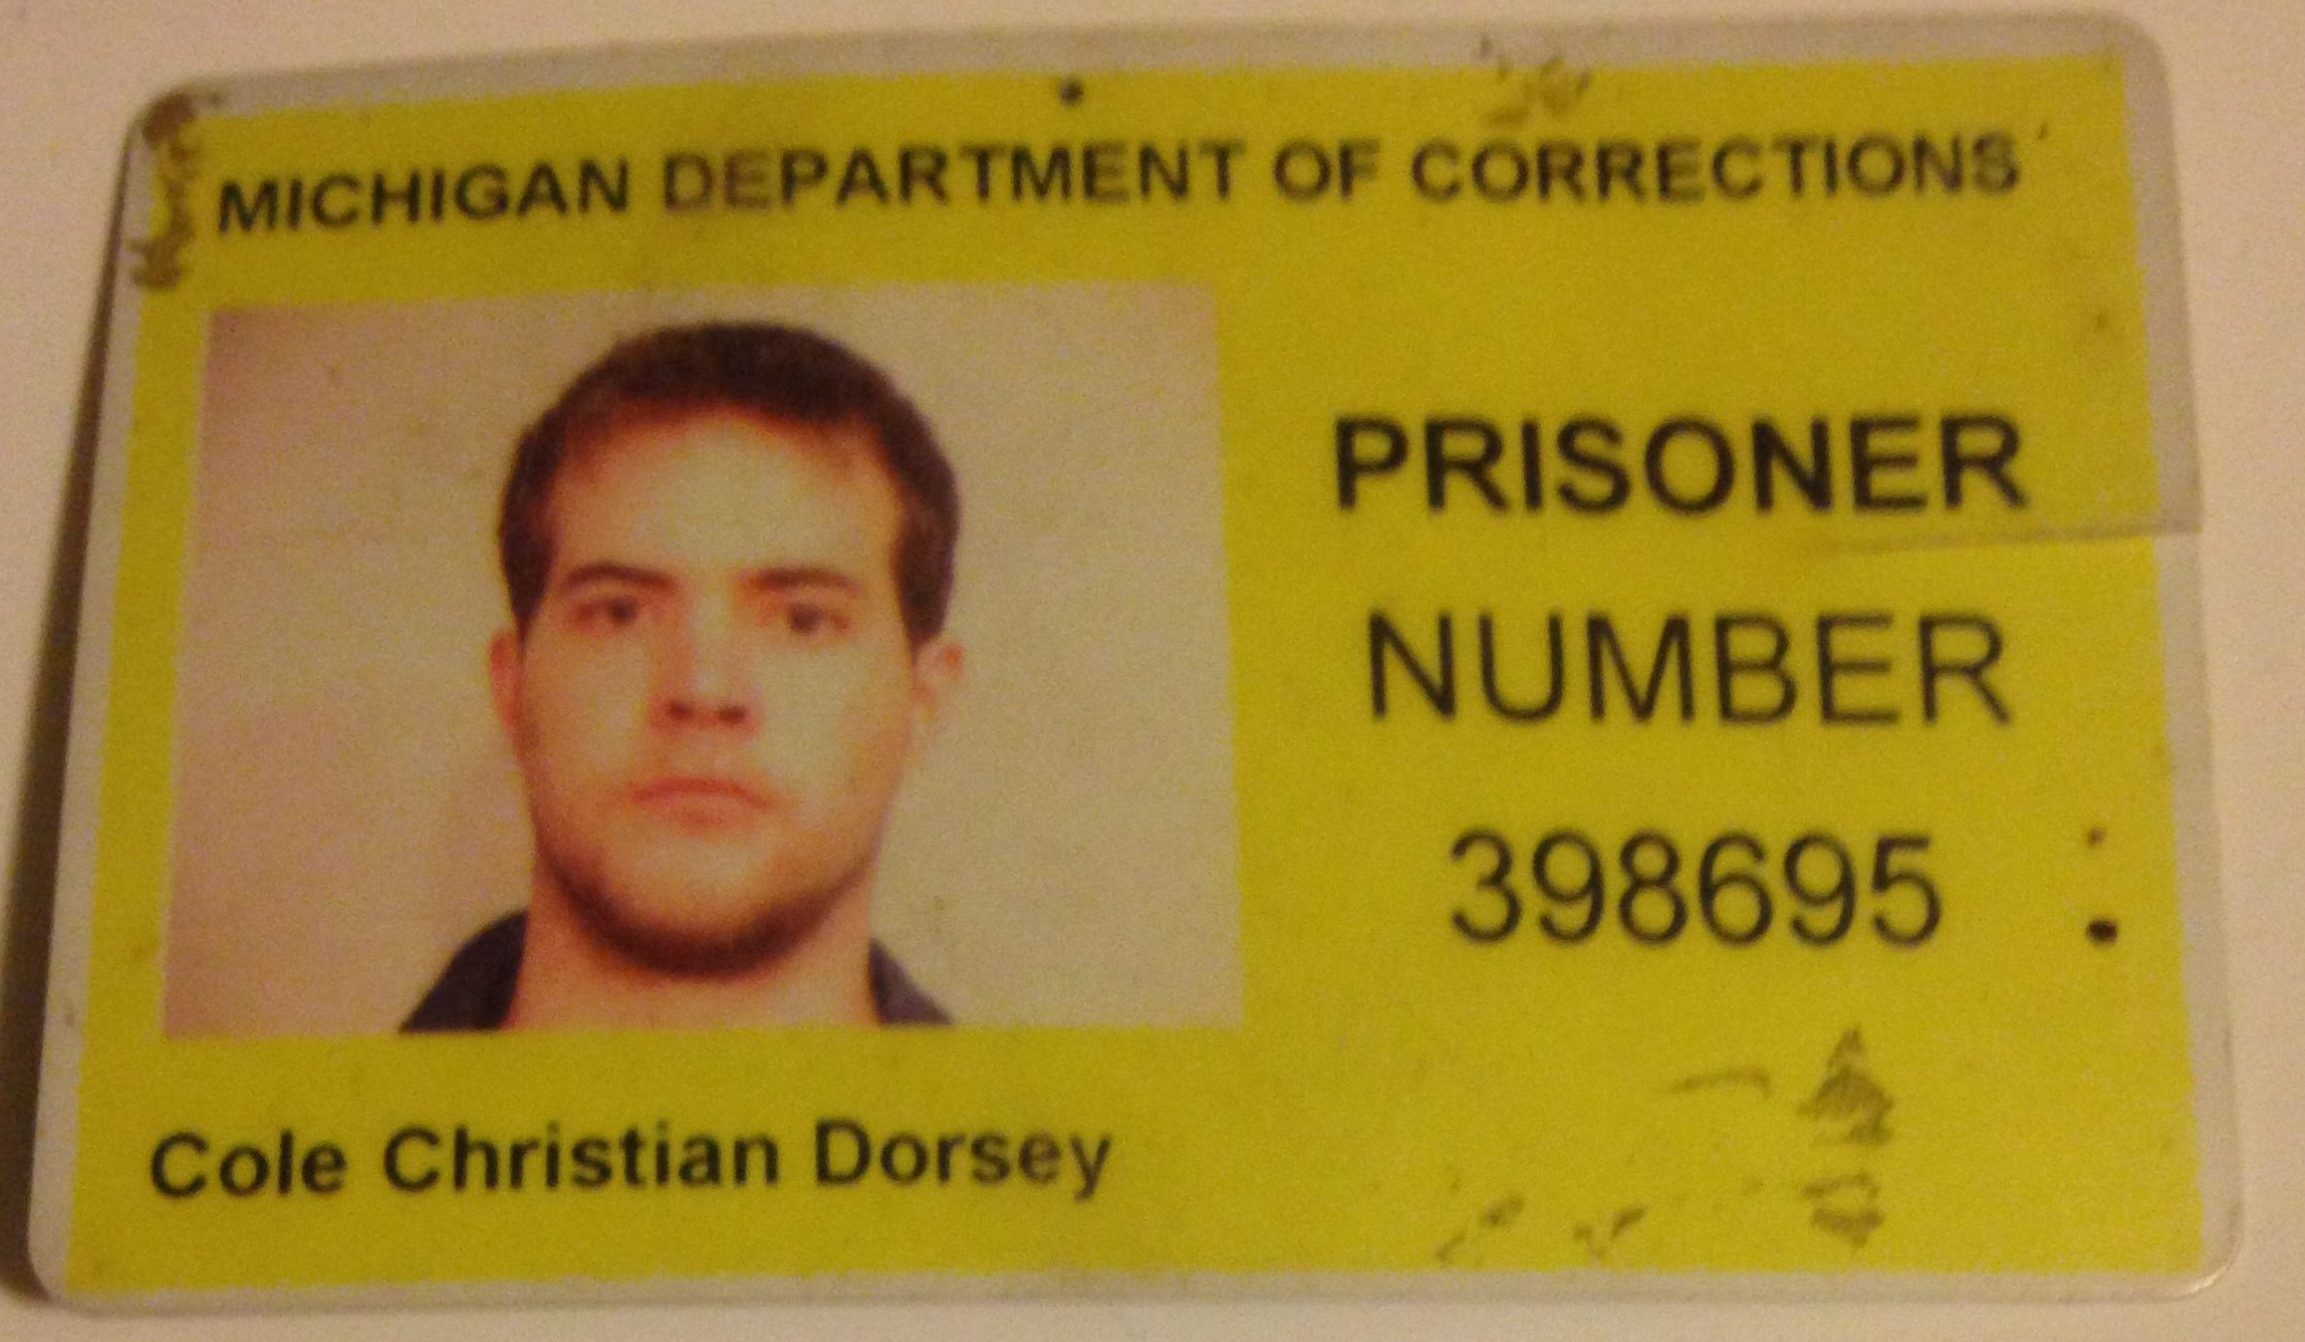 Cole Dorsey’s Prisoner ID. Dorsey now works on inmate rights.